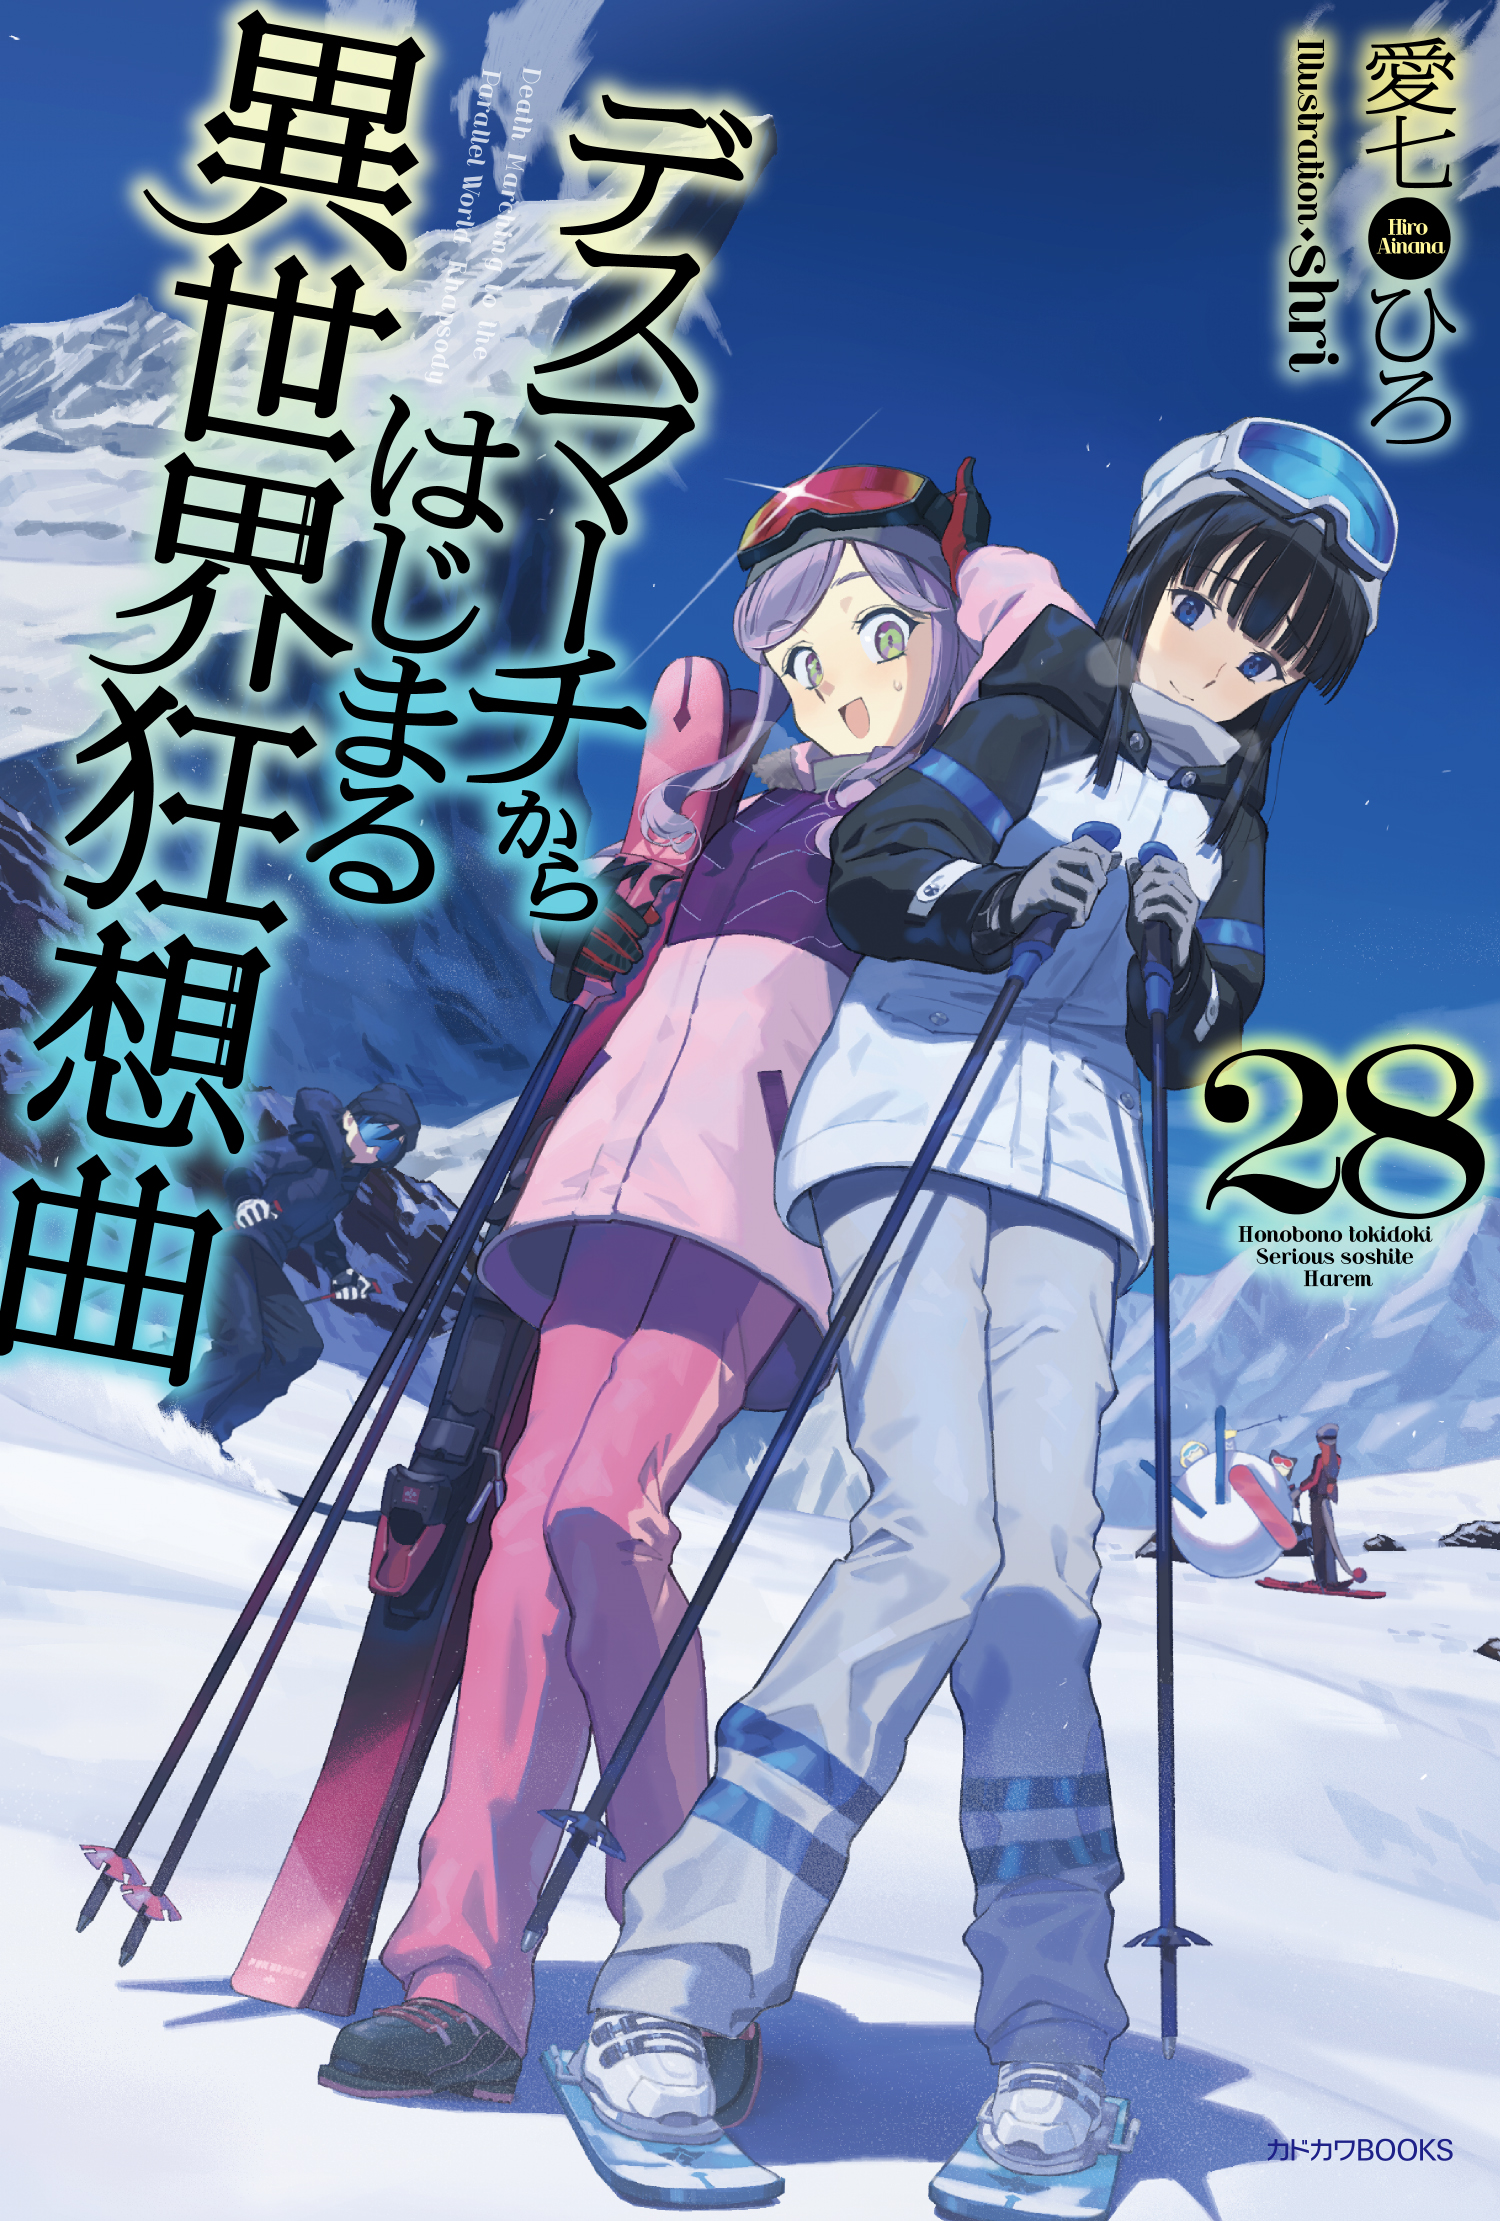 Light Novel Volume 24, Death March to the Parallel World Rhapsody Wiki